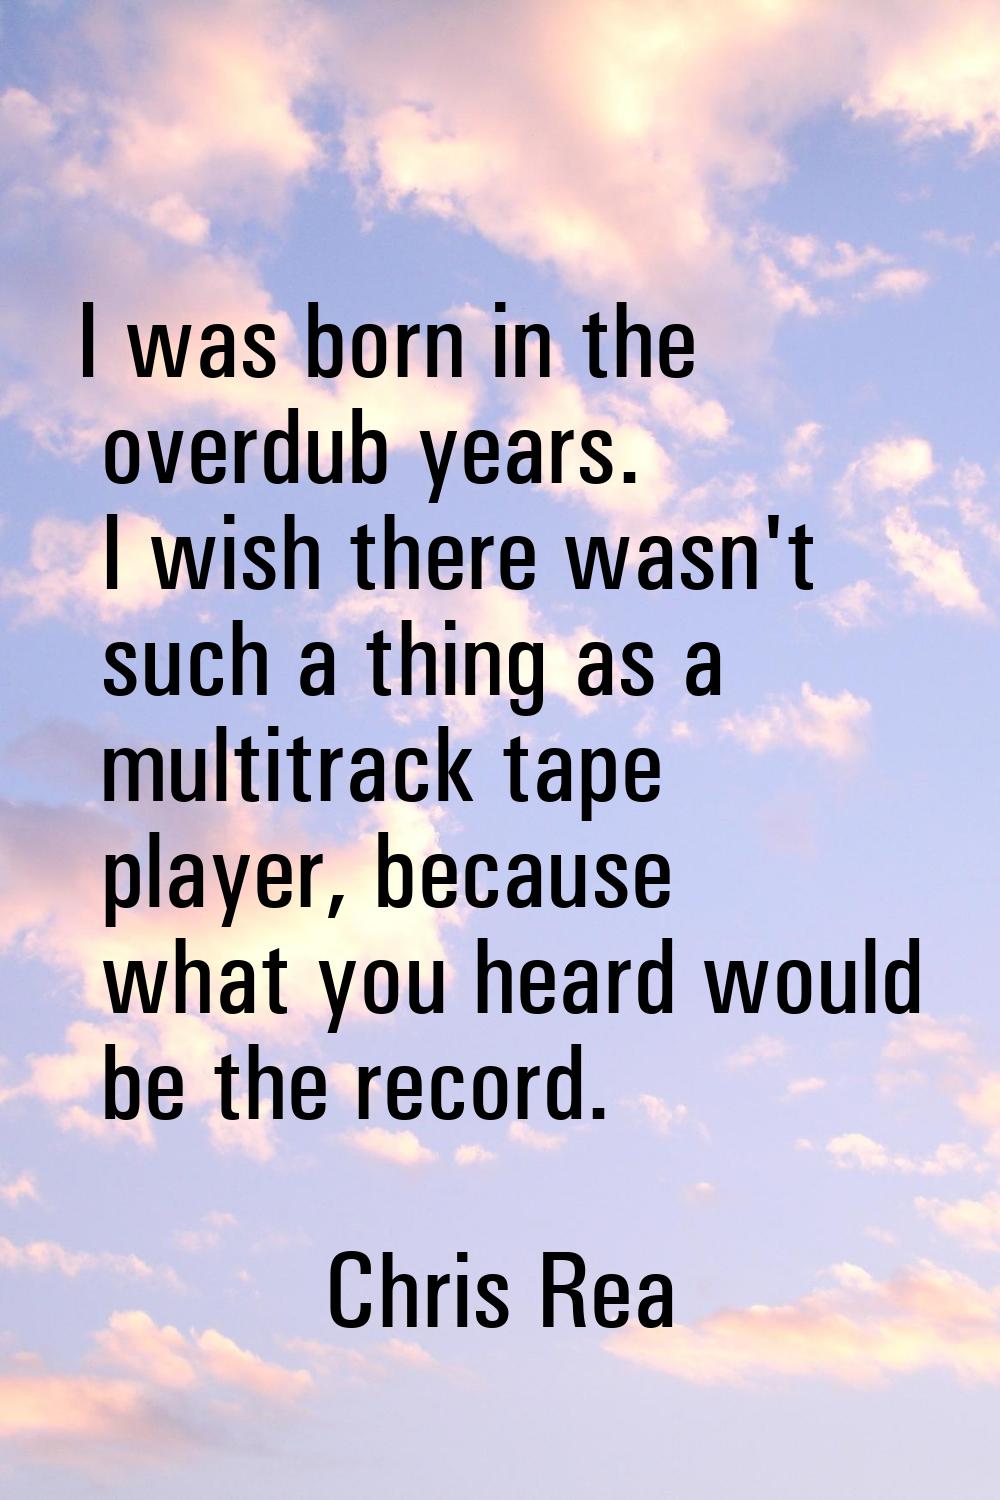 I was born in the overdub years. I wish there wasn't such a thing as a multitrack tape player, beca